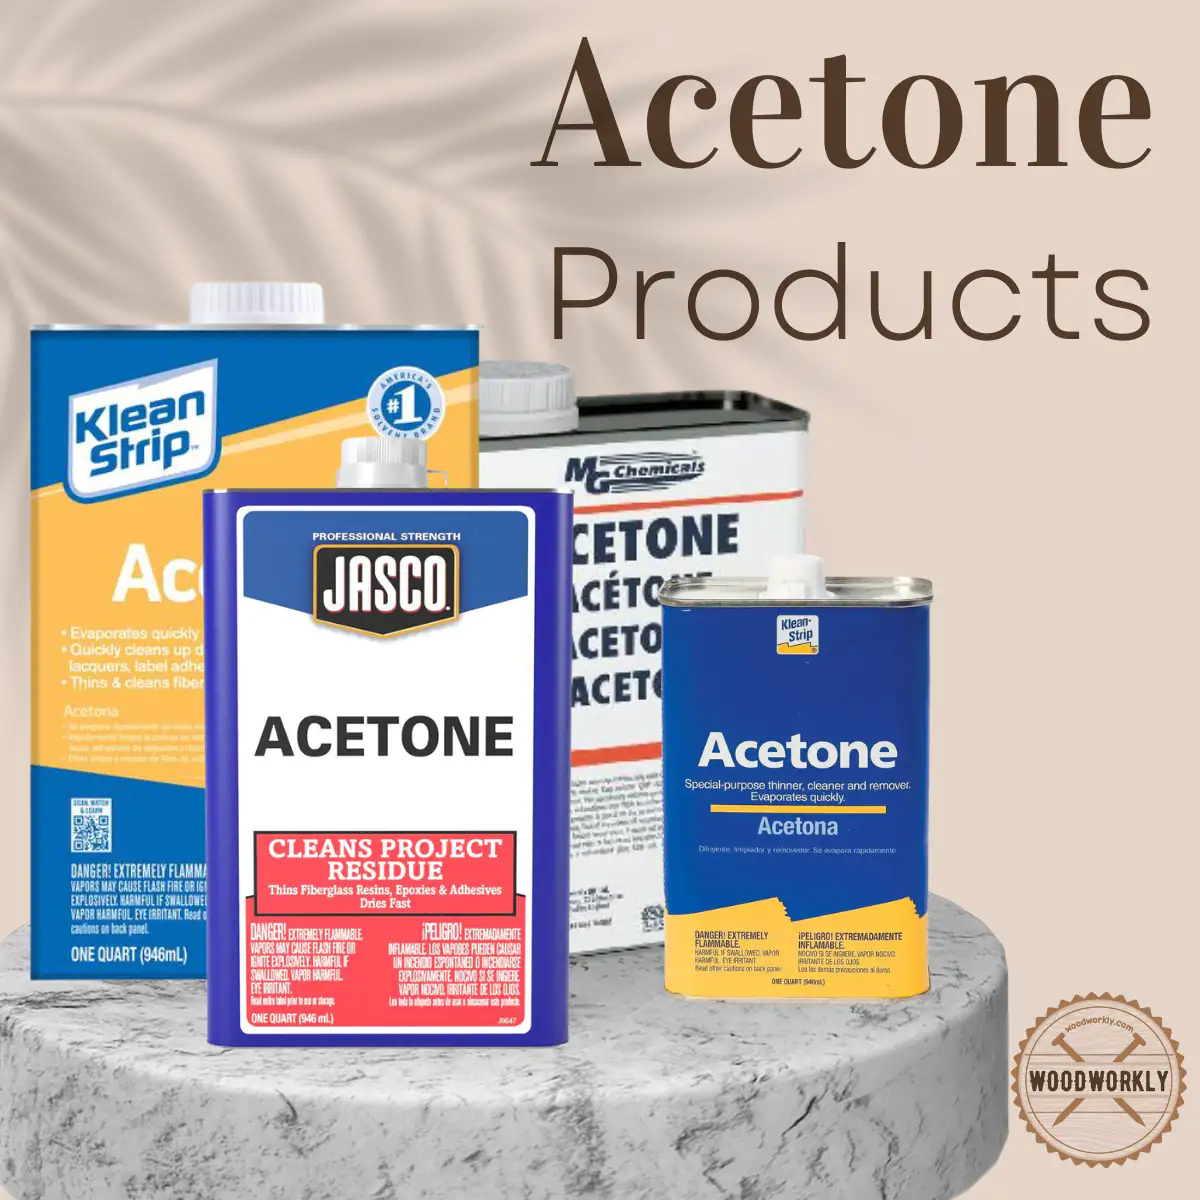 Acetone products